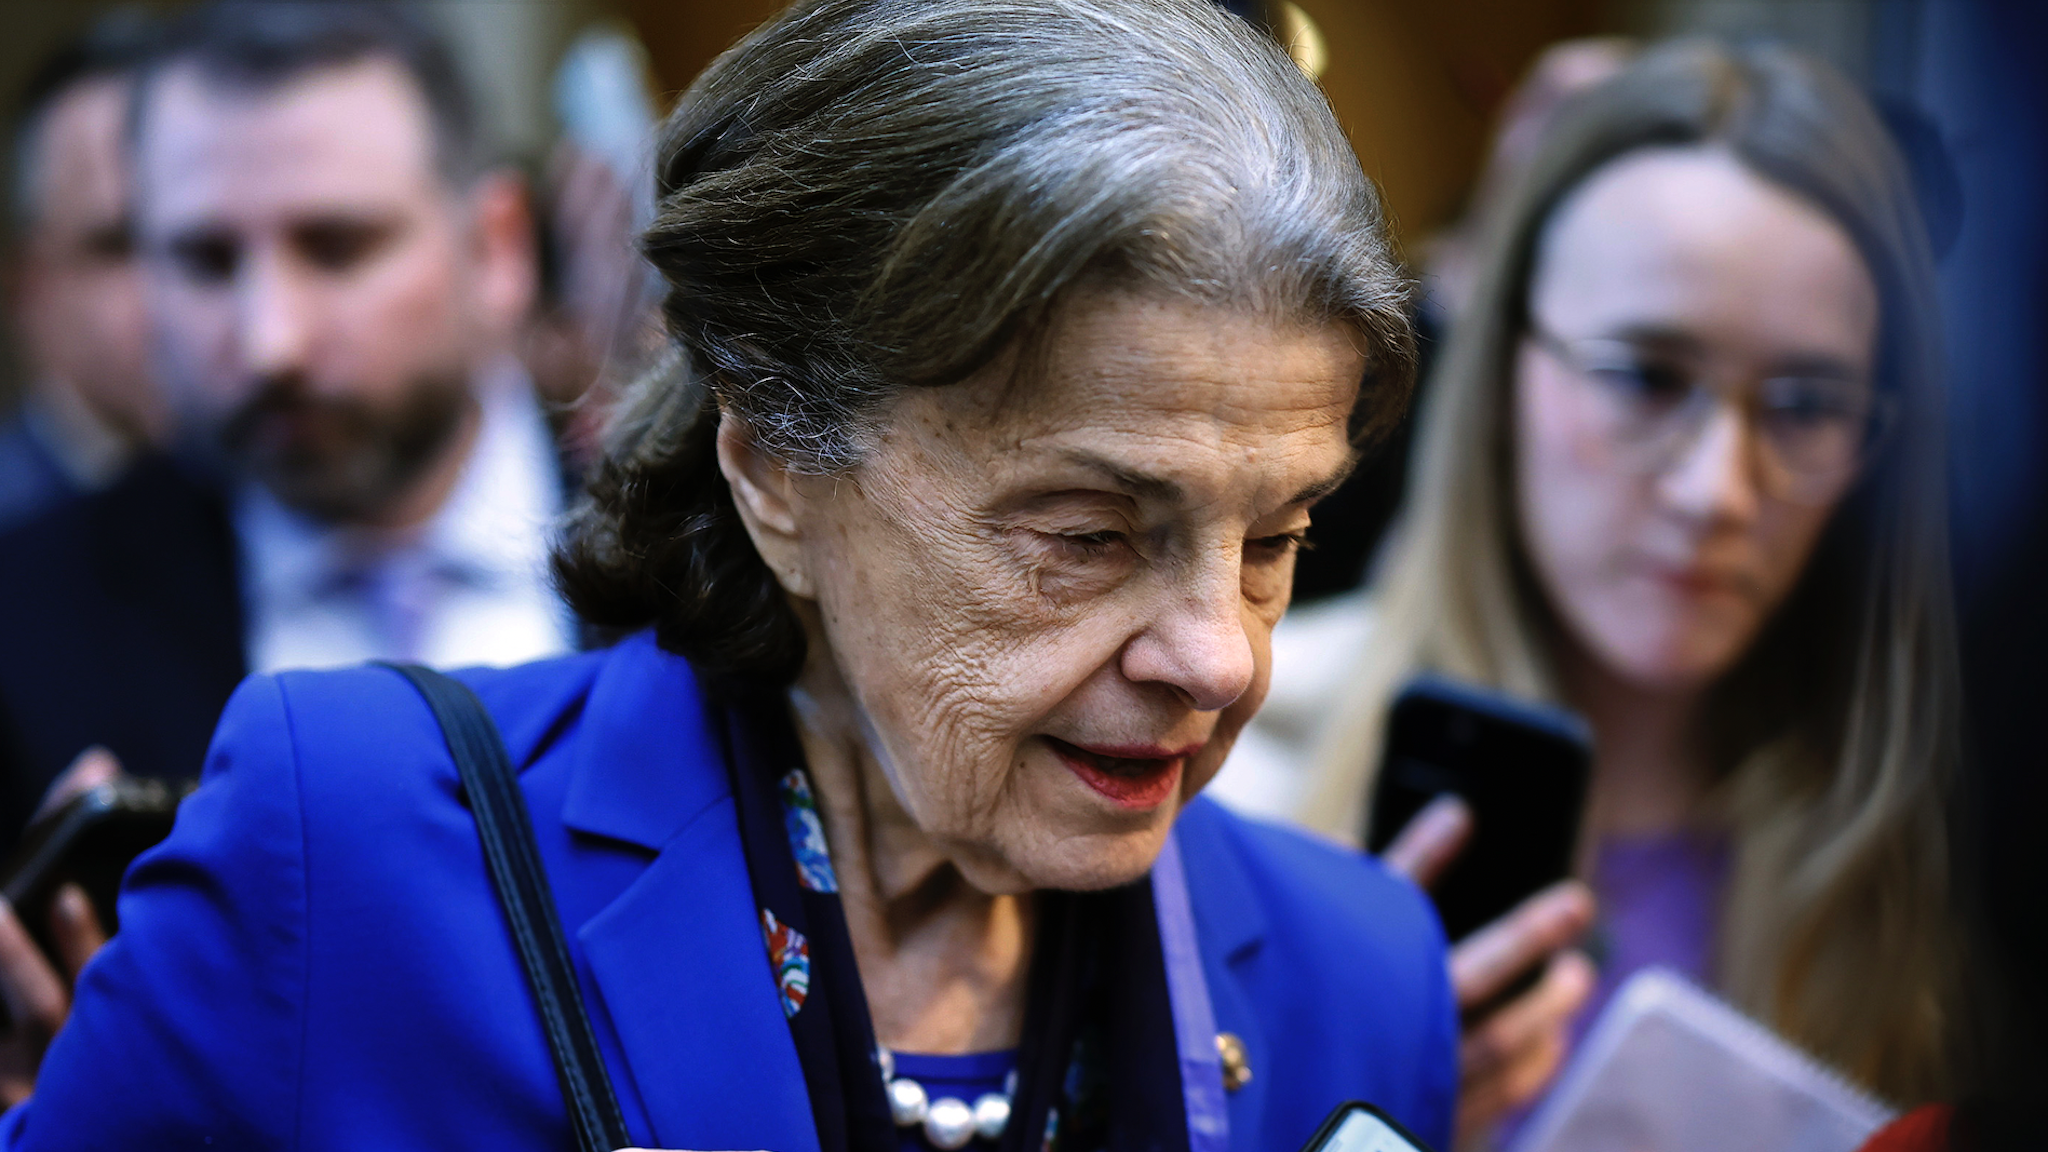 WASHINGTON, DC - FEBRUARY 14: Sen. Dianne Feinstein (D-CA) is surrounded by reporters as she heads to the Senate Chamber for a vote in the U.S. Capitol on February 14, 2023 in Washington, DC. Feinstein announced Tuesday that she will not seek re-election in 2024